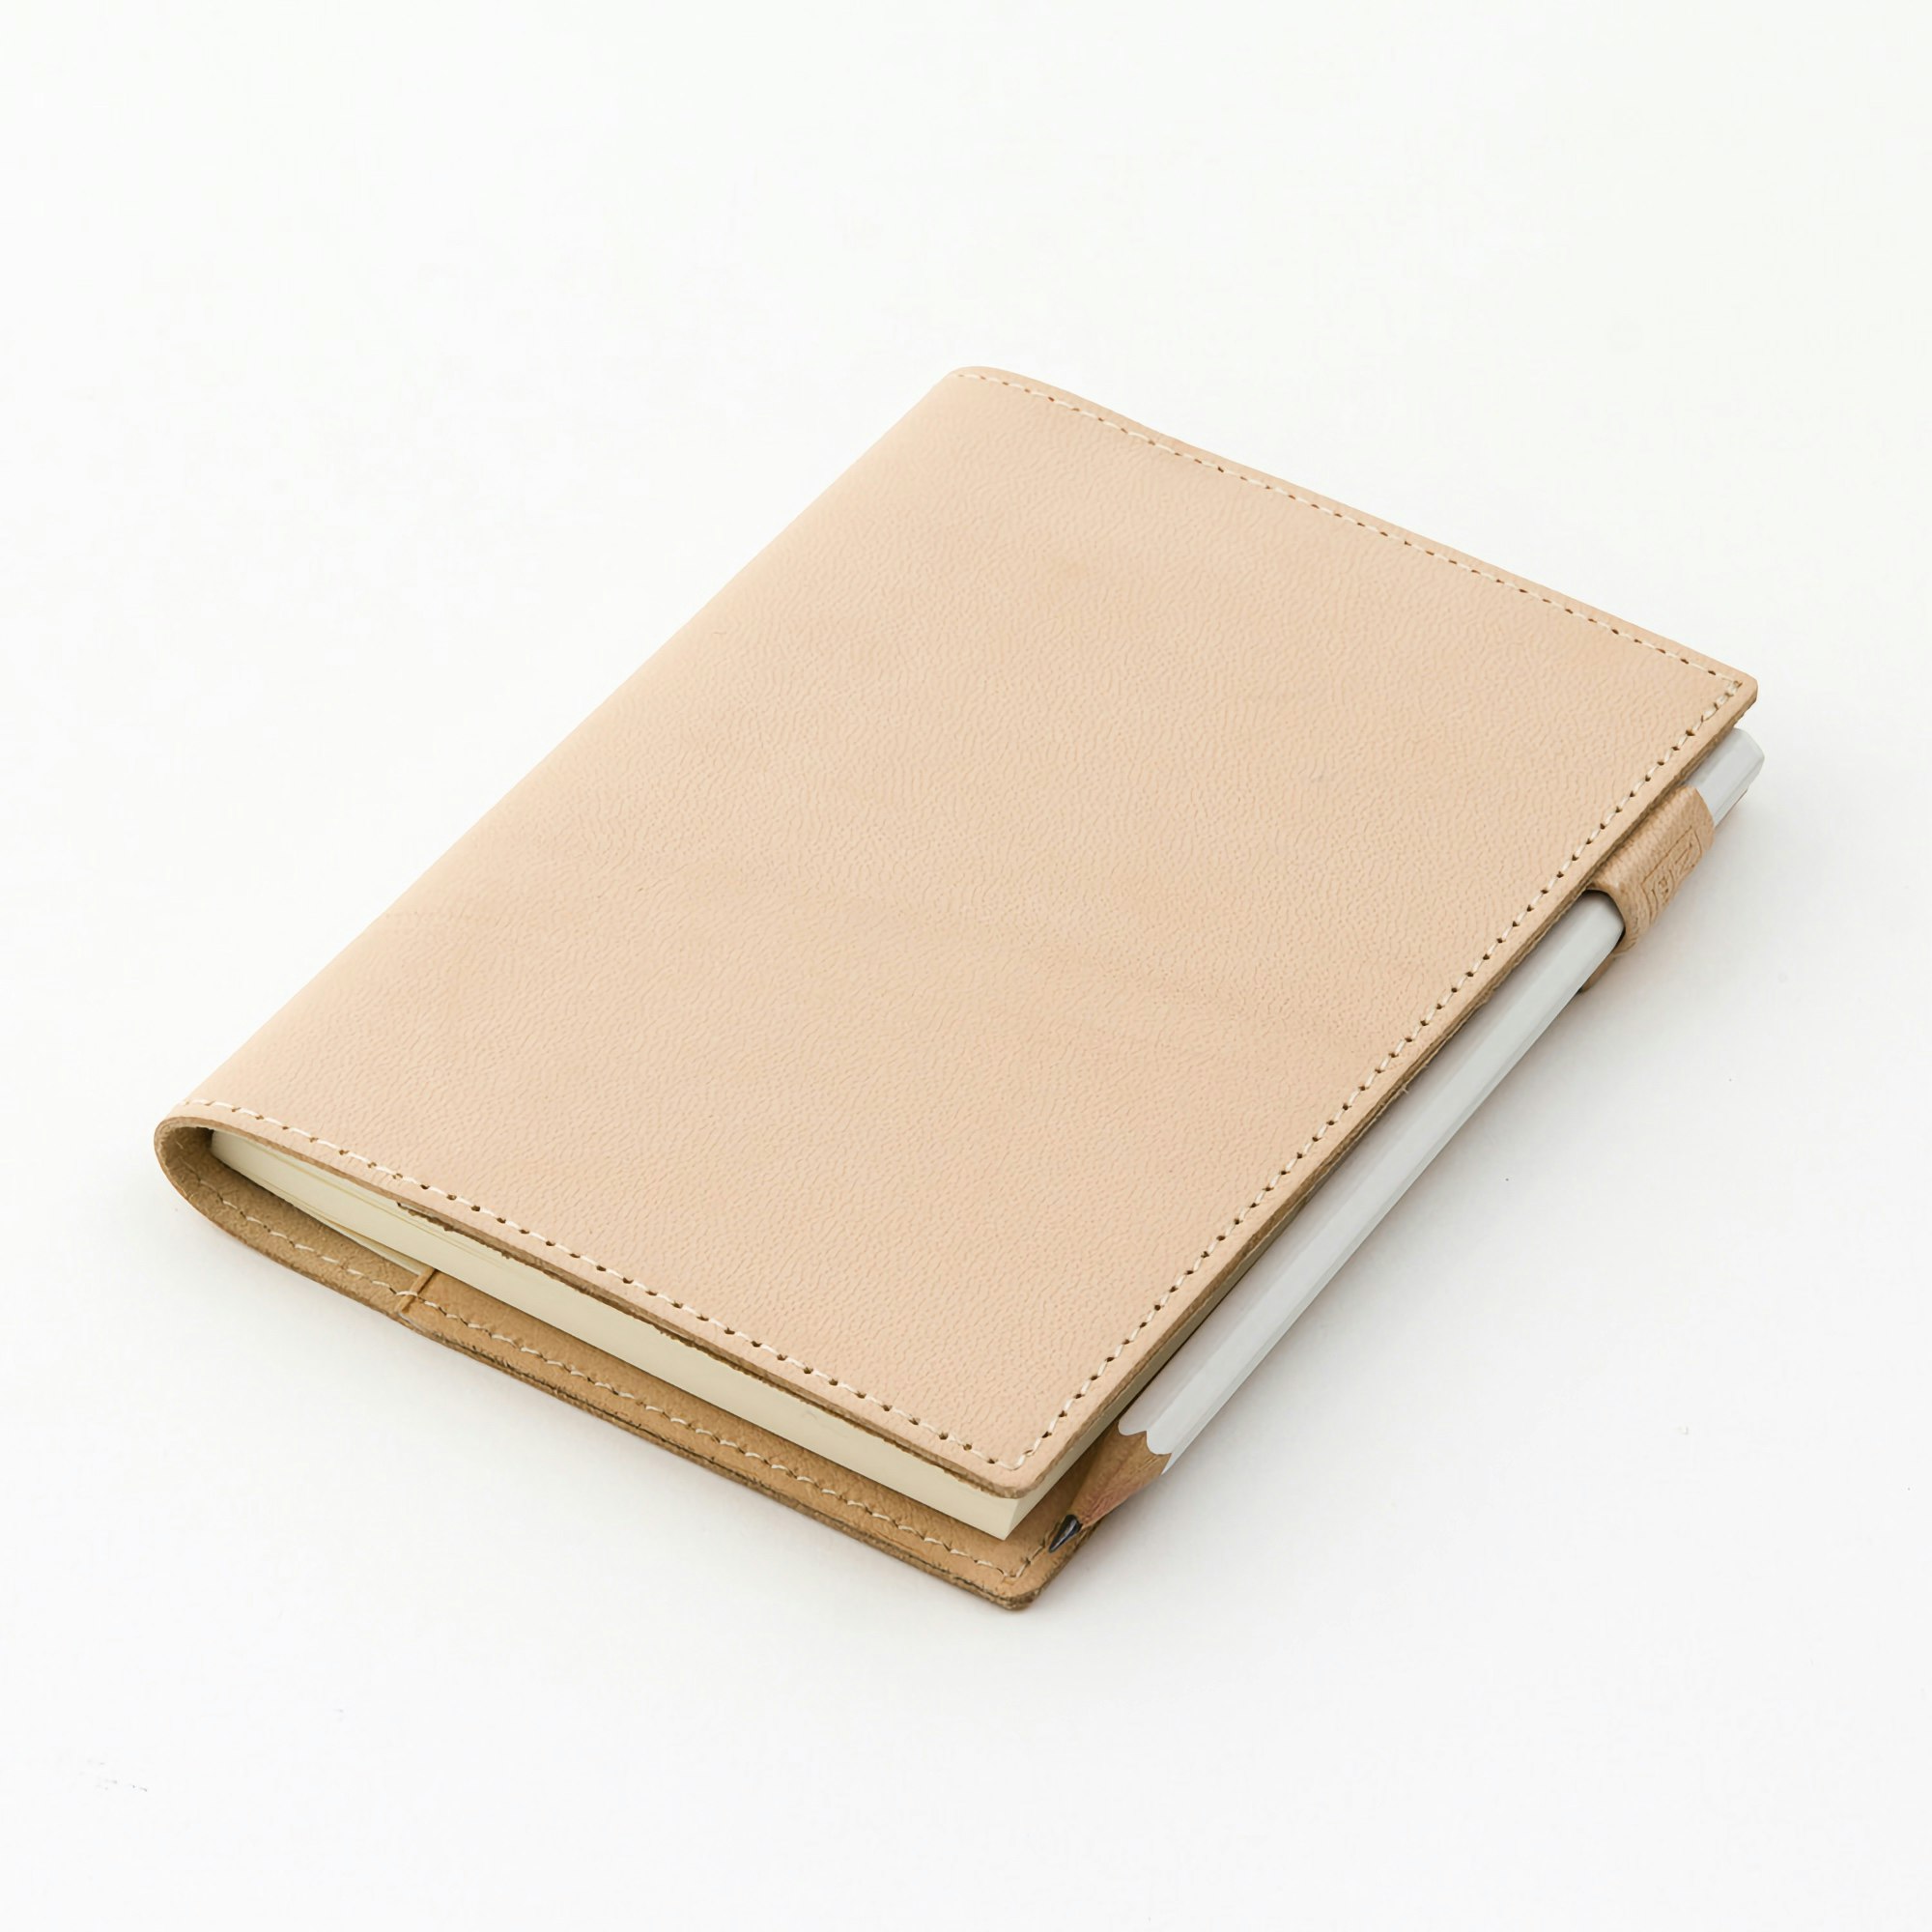 Midori MD Goat Leather Cover [A6]